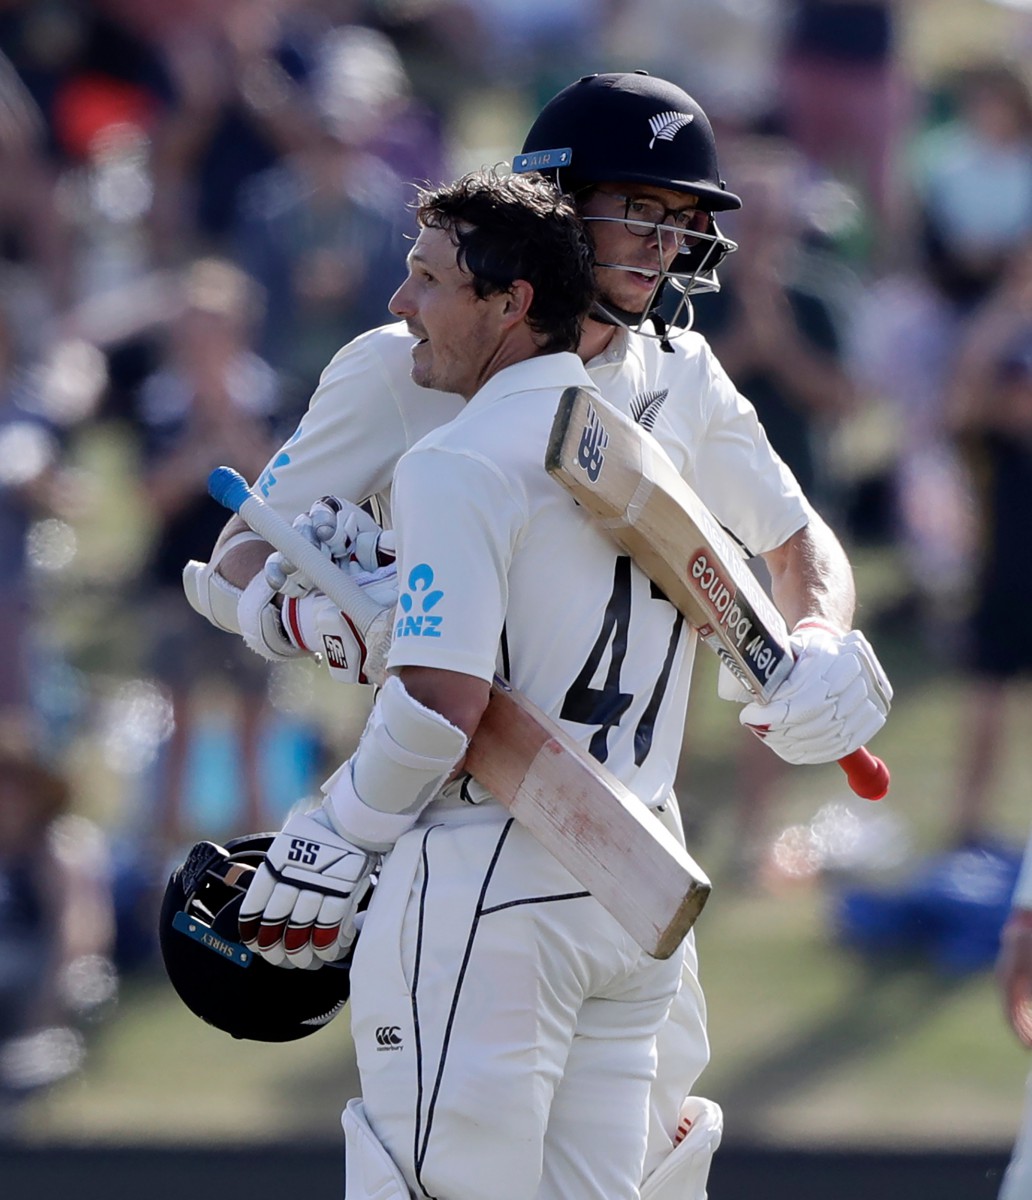 , England frustrated as New Zealand lead by 41 runs with battling BJ Watlings unbeaten ton adding to misery